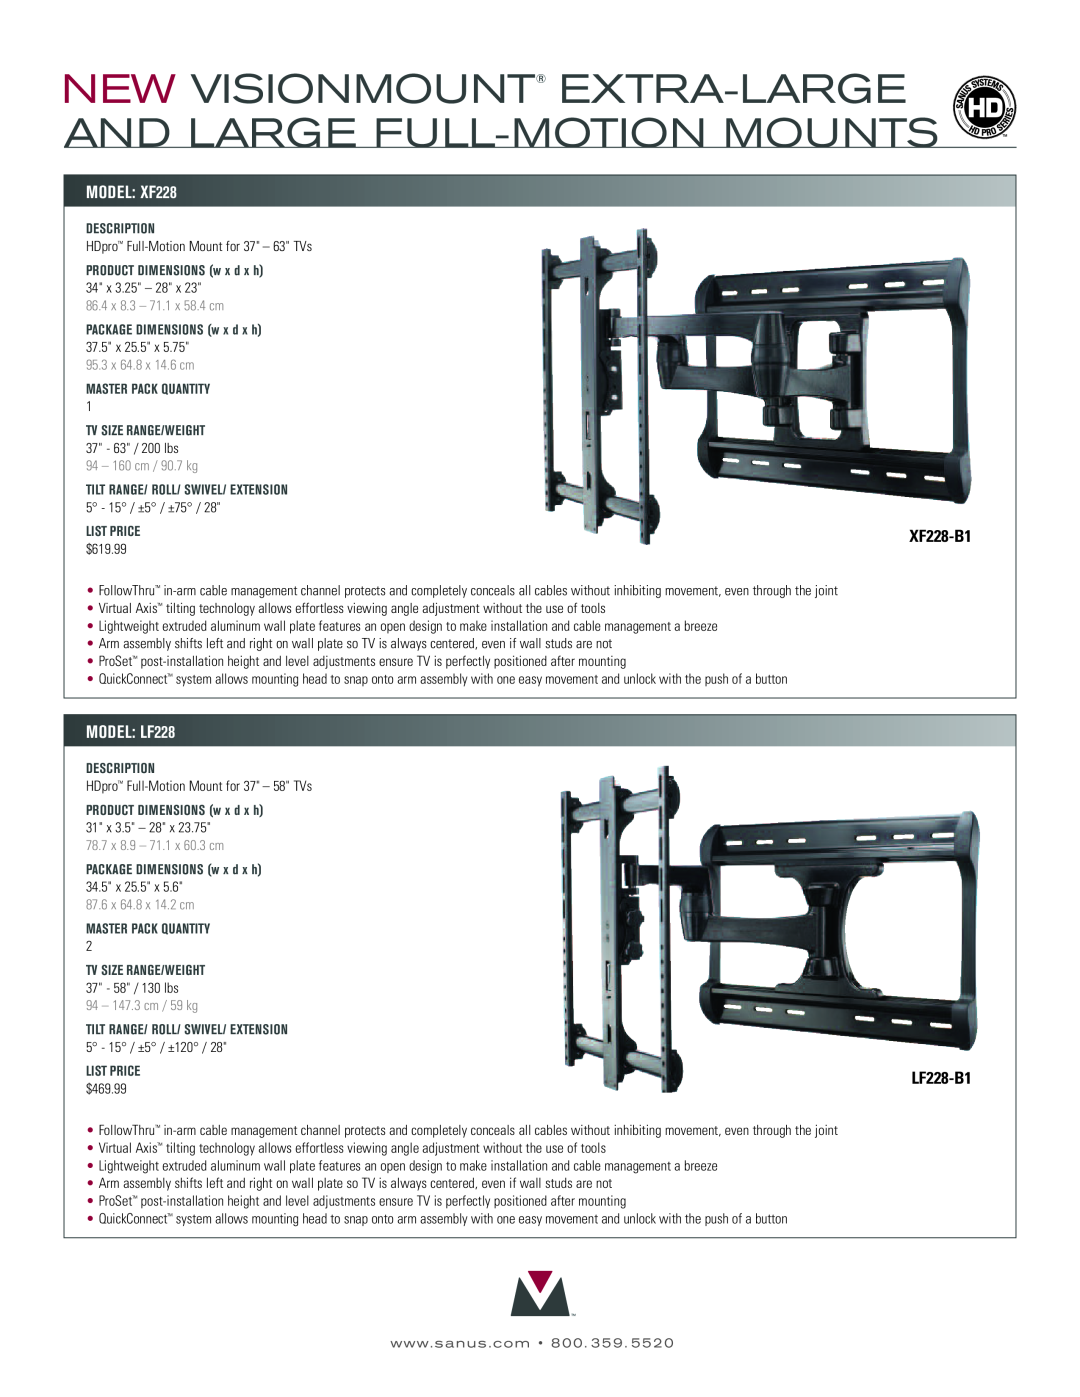 Sanus Systems LF228-B1 manual New Visionmount Extra-Large And Large Full-Motion Mounts, MODEL XF228, MODEL LF228, $619.99 